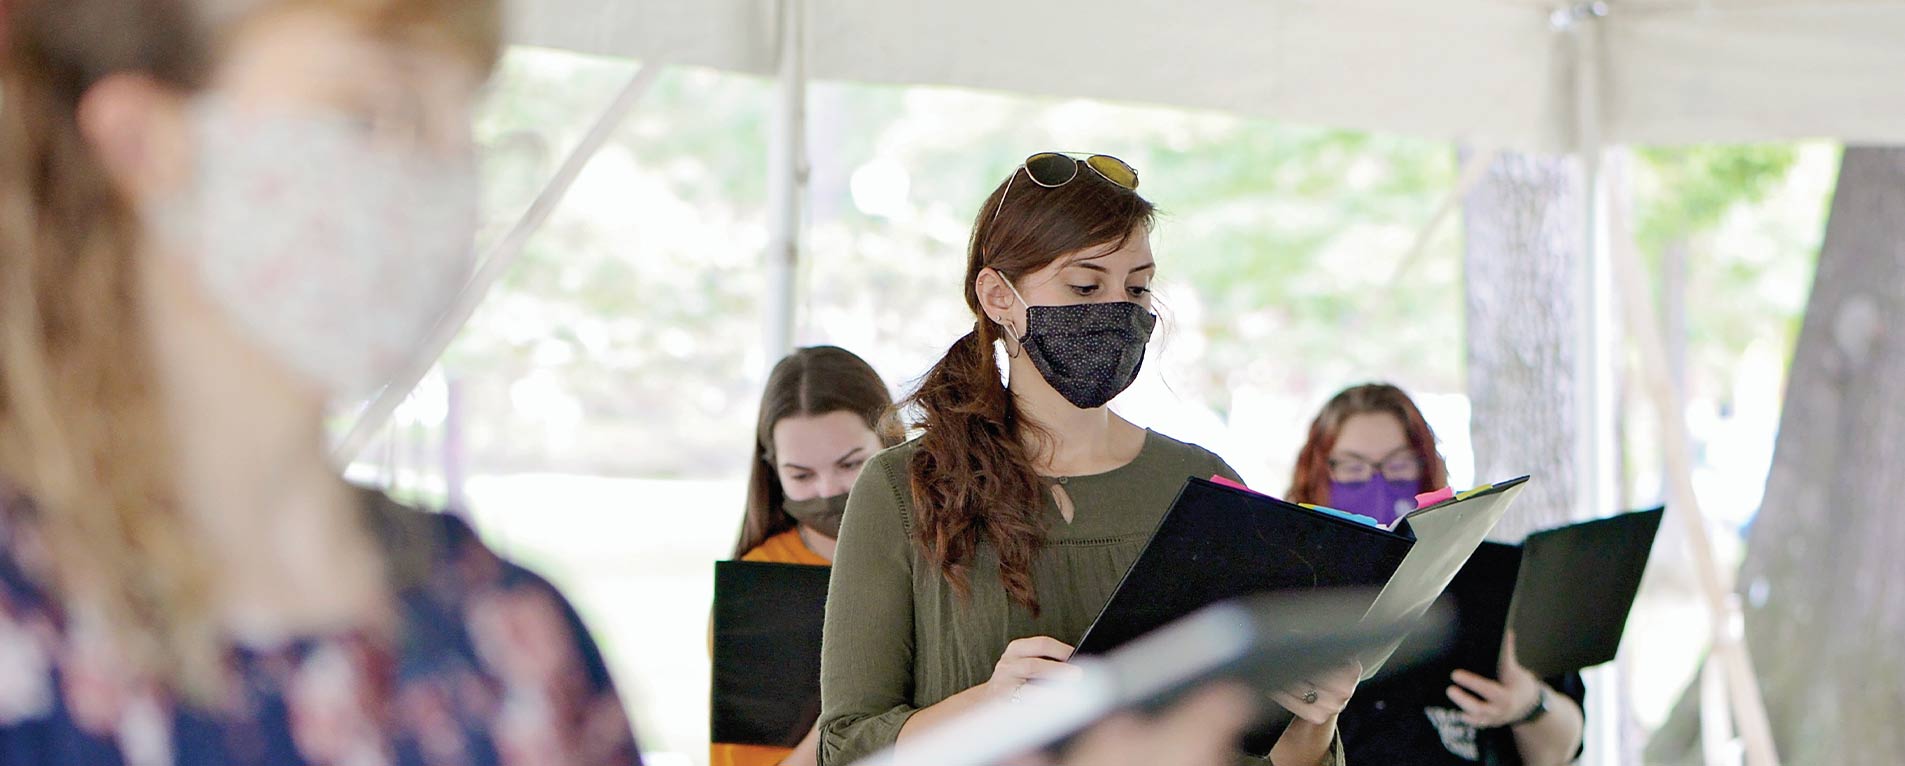 Music students, including graduate student Taylor Davis, practice outdoors underneath a tent to help ensure appropriate physical distancing. Photo by Robin Johnson